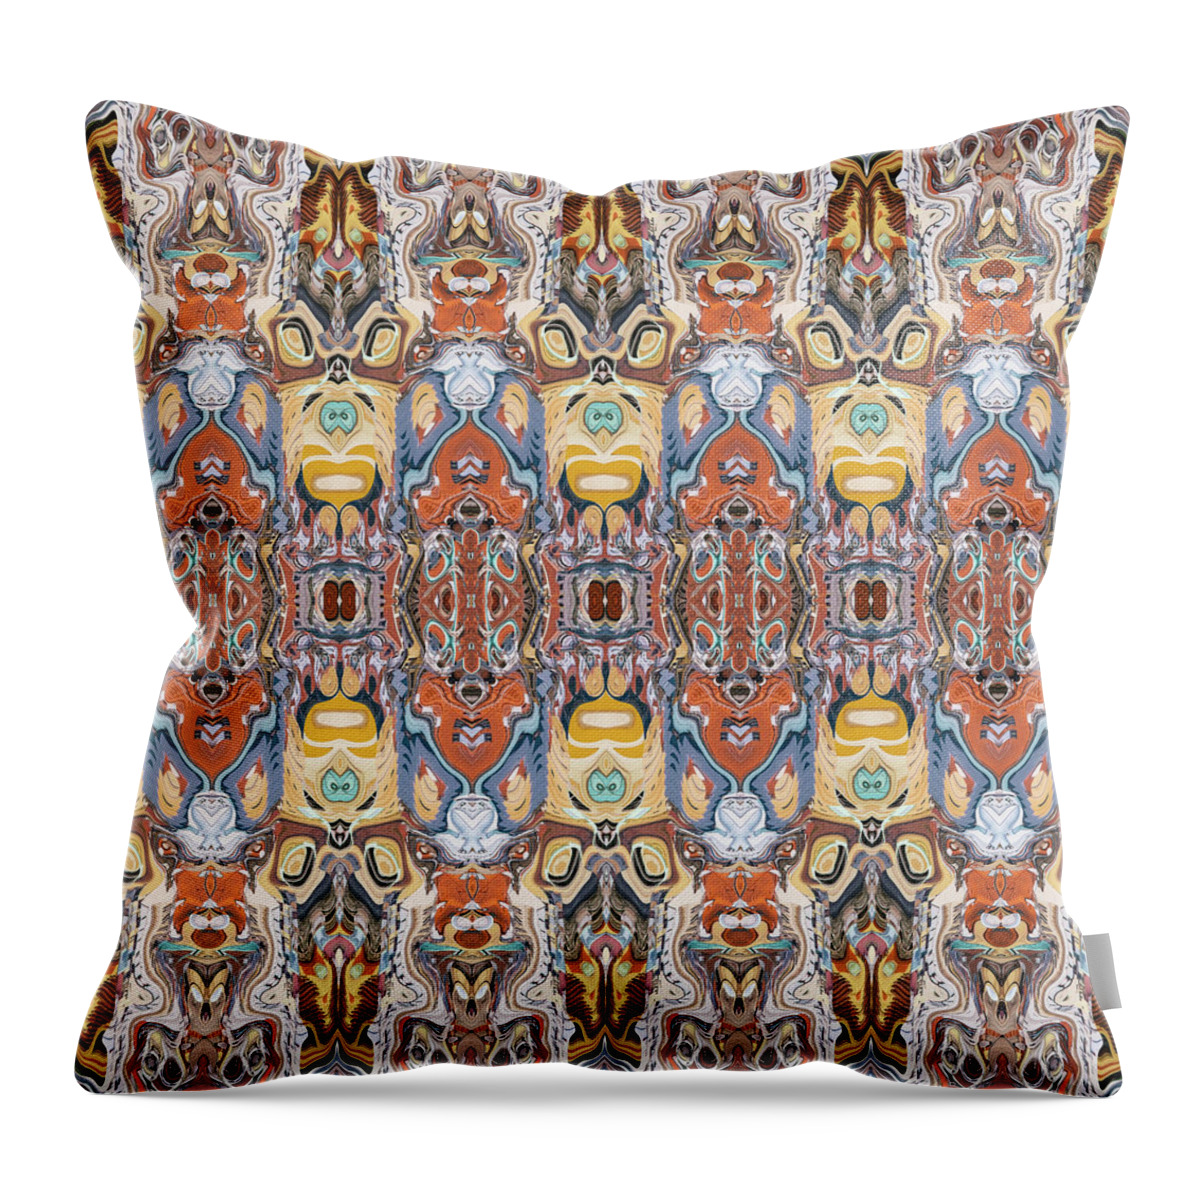 Masks Throw Pillow featuring the digital art Abstract Tribal Pattern by Phil Perkins